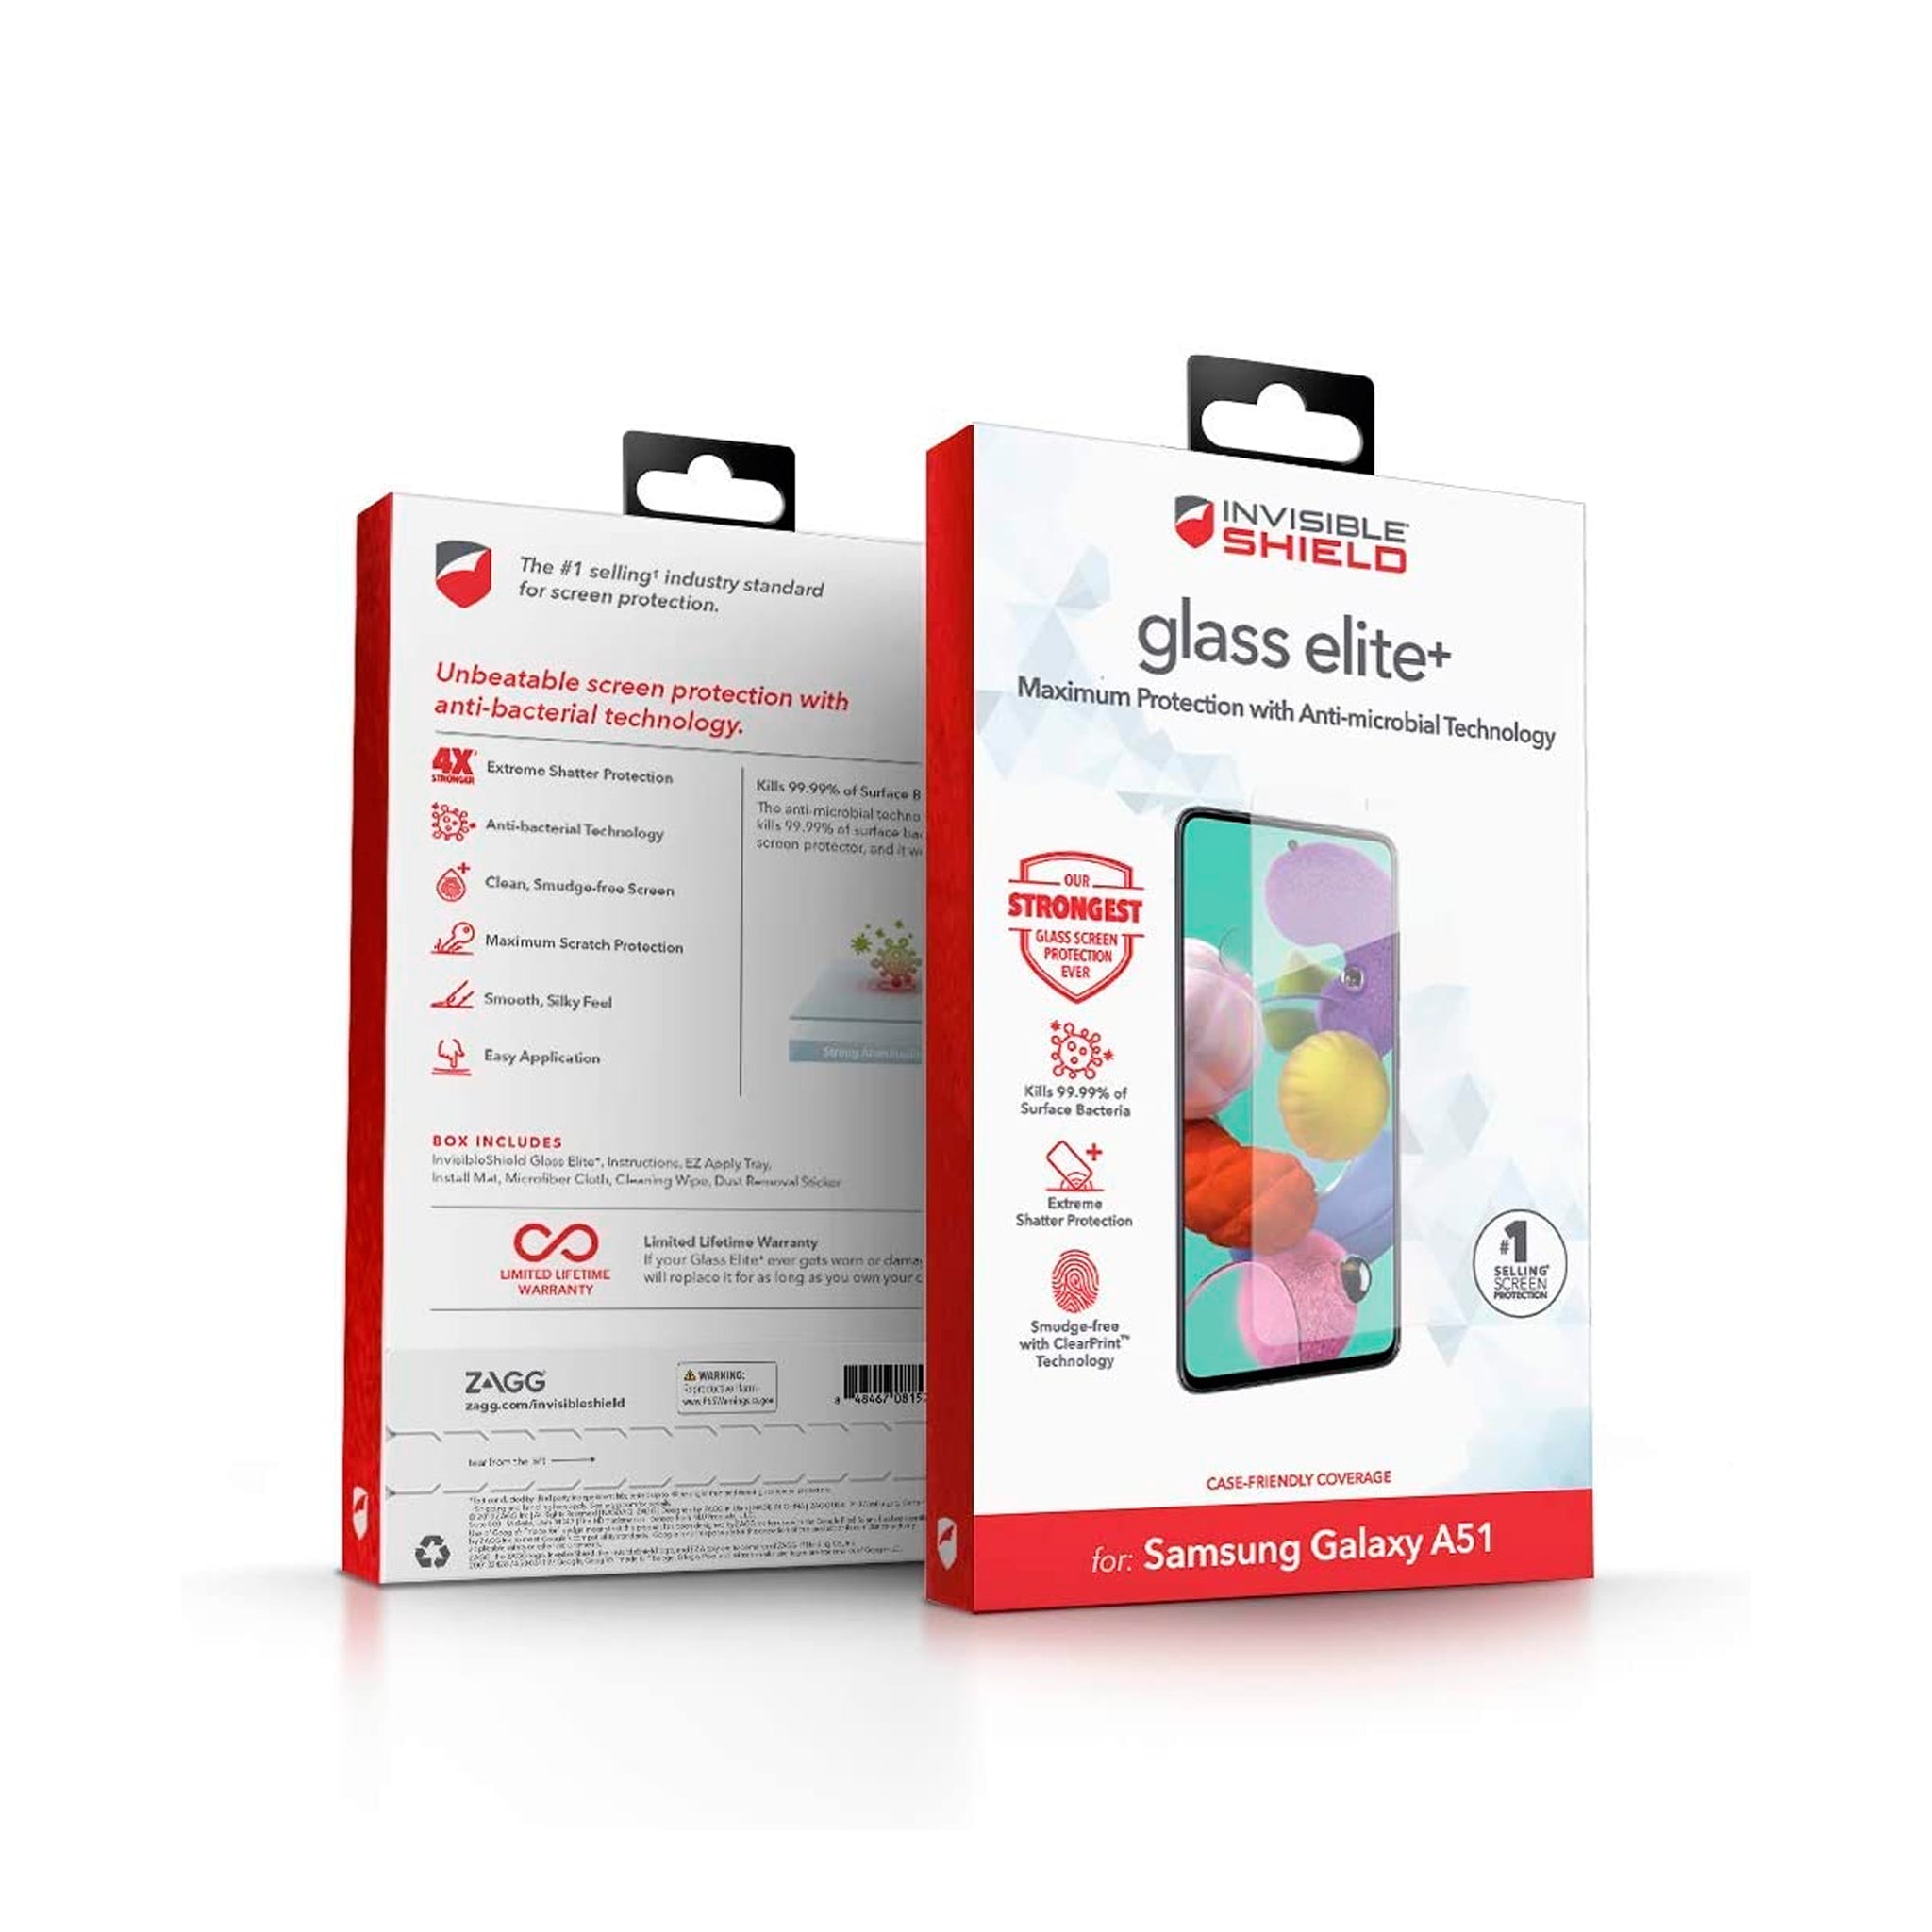 Zagg - Invisibleshield Glass Elite Plus Glass Screen Protector For Samsung Galaxy A51 - Clear